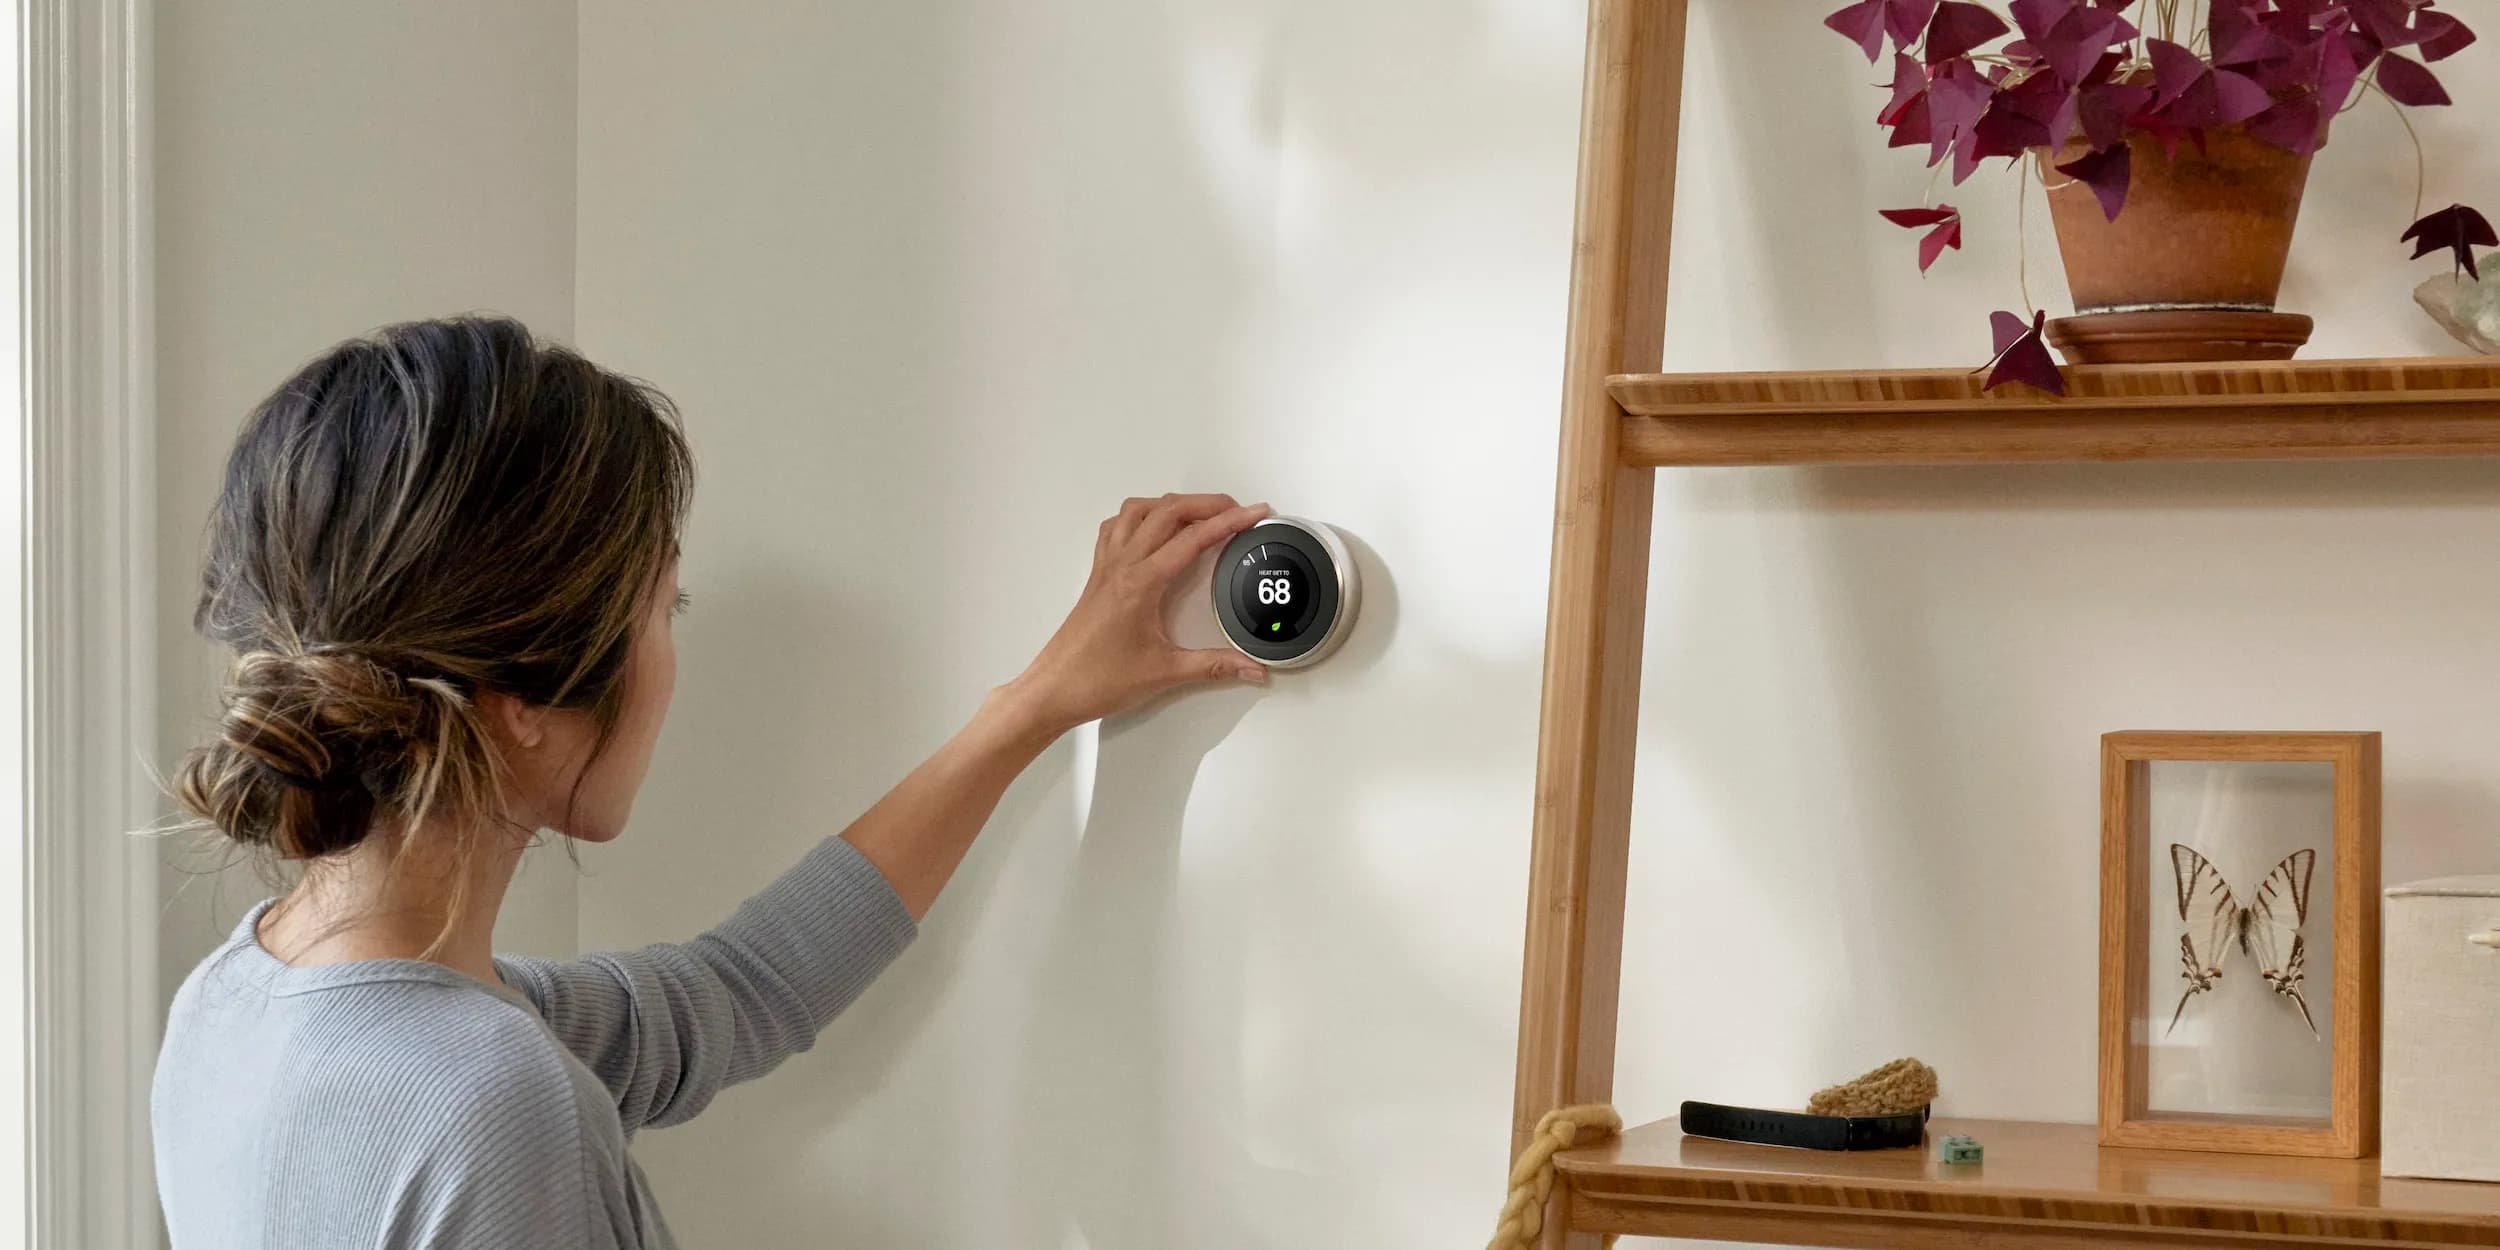 Google Nest Learning Thermostat – OhmConnect